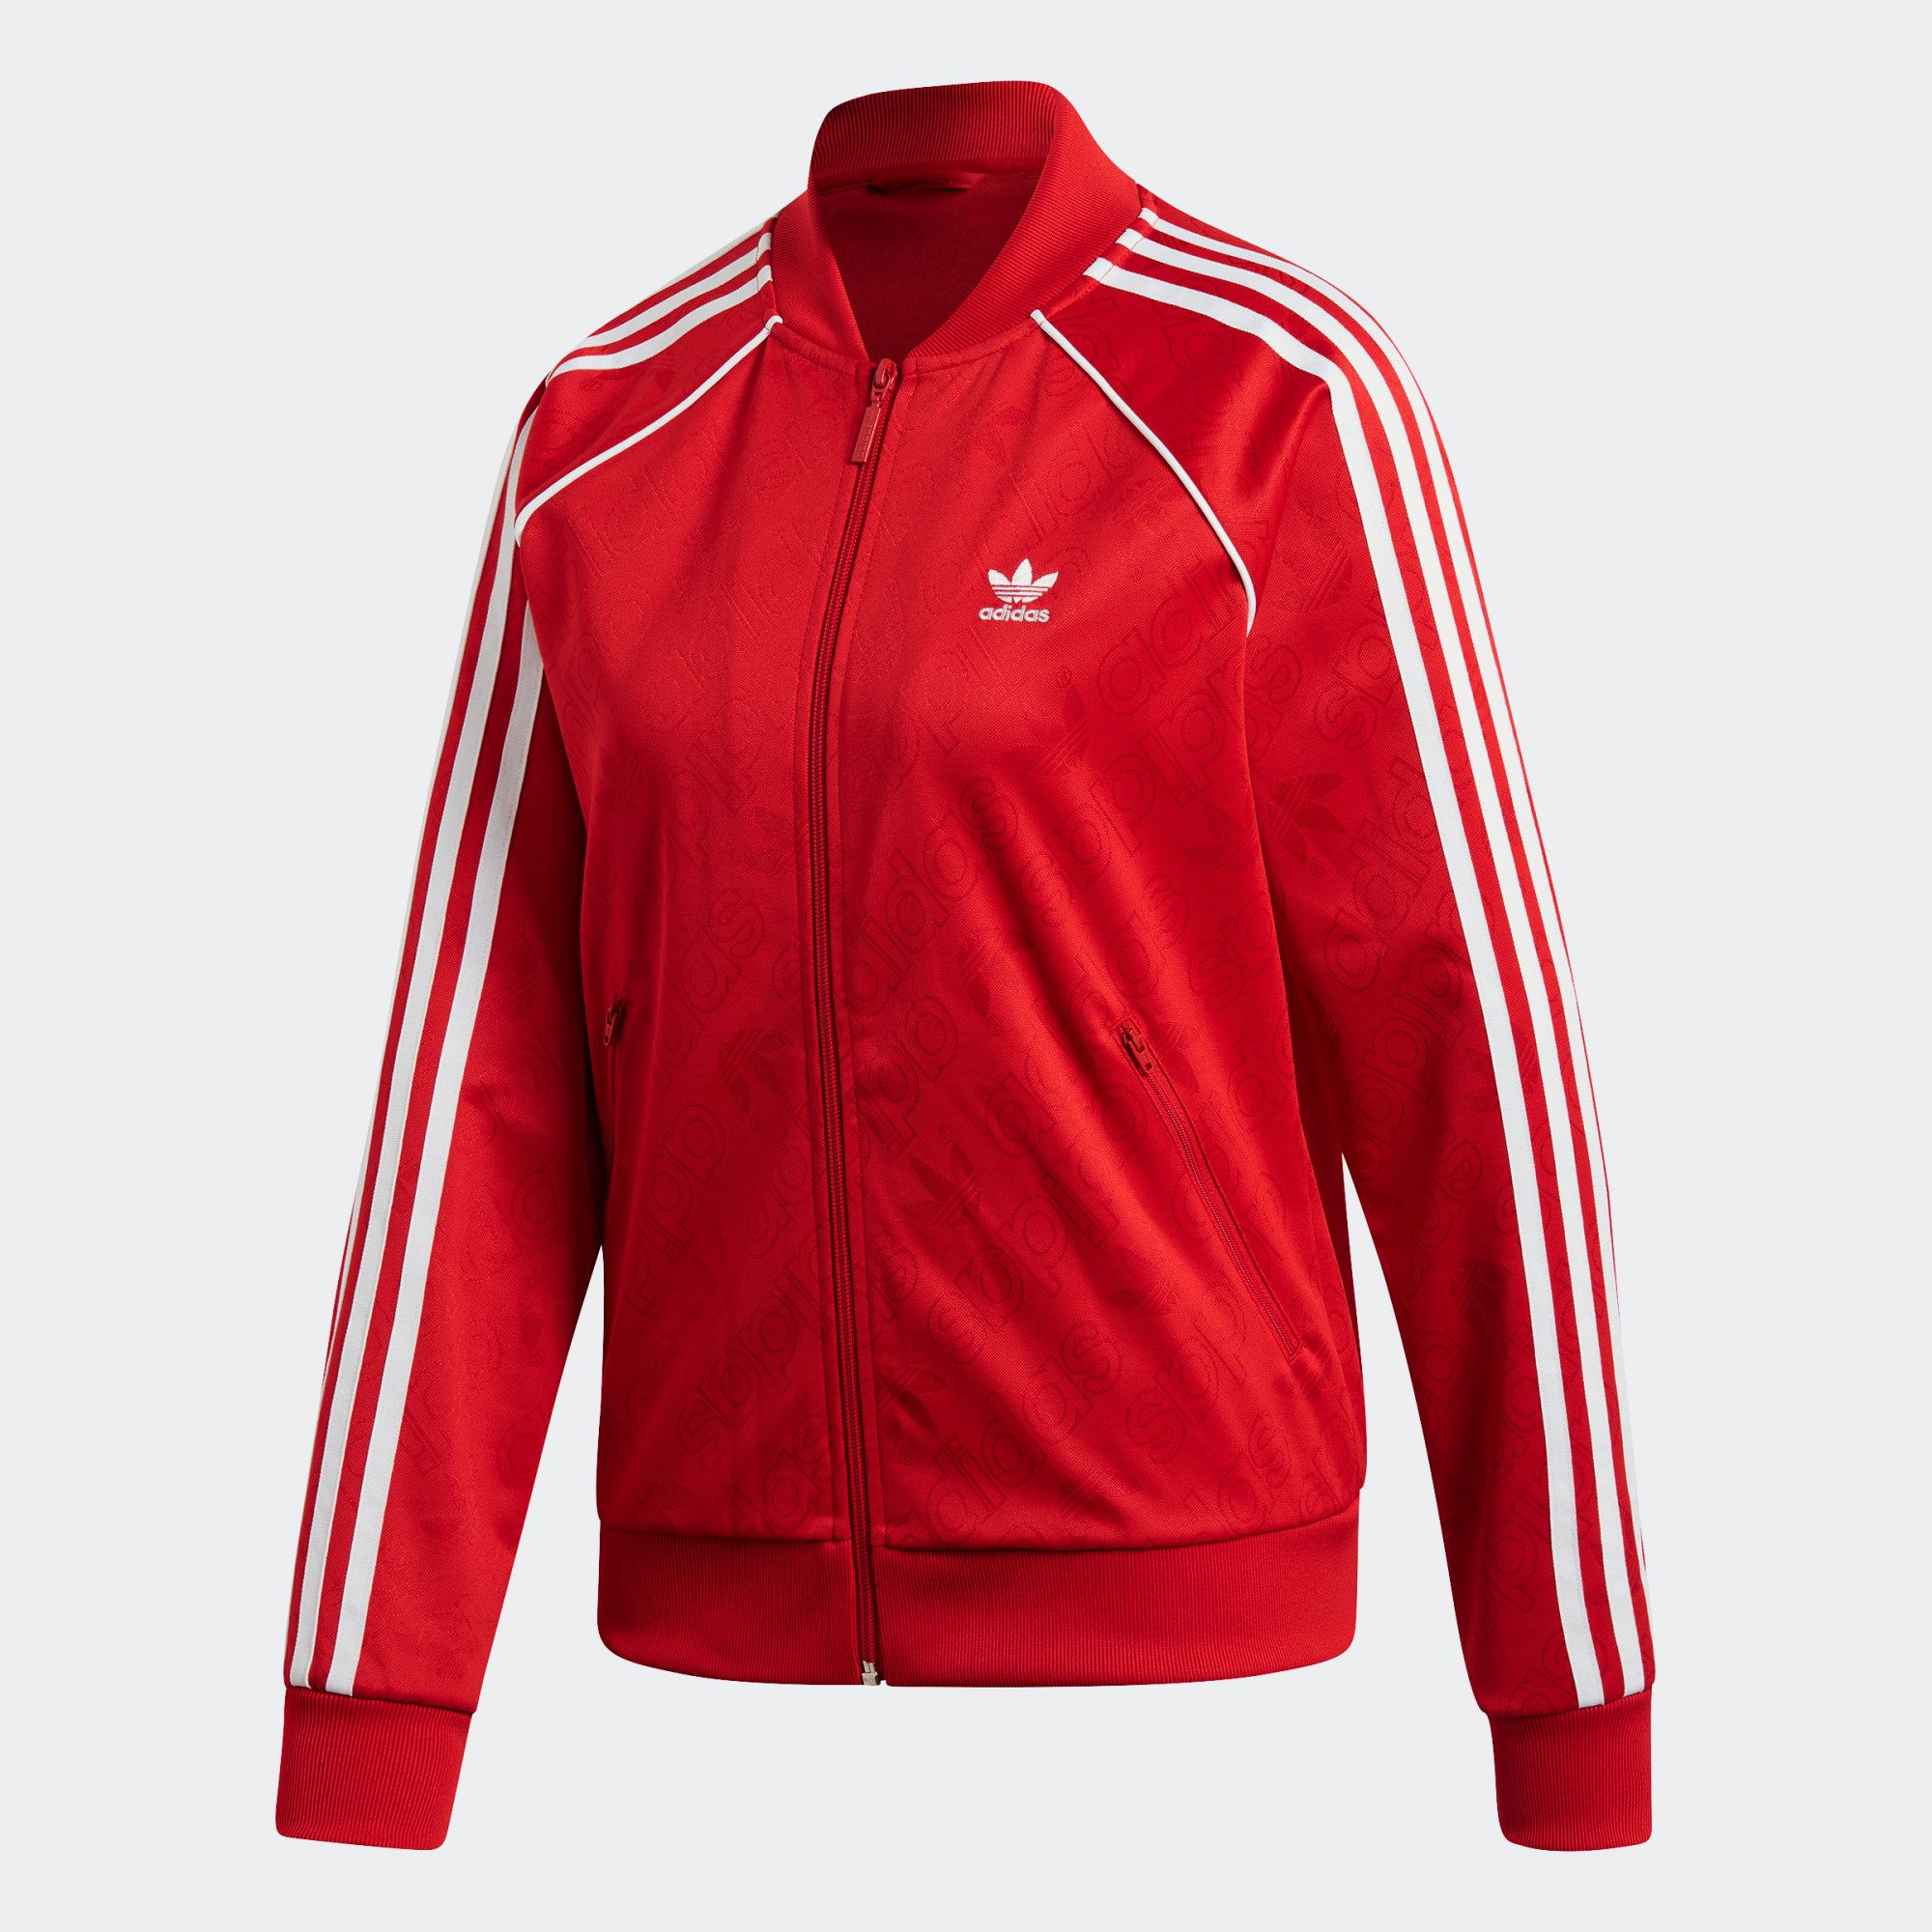 adidas SST Track Jacket - Lush Red – Online Sneaker Store